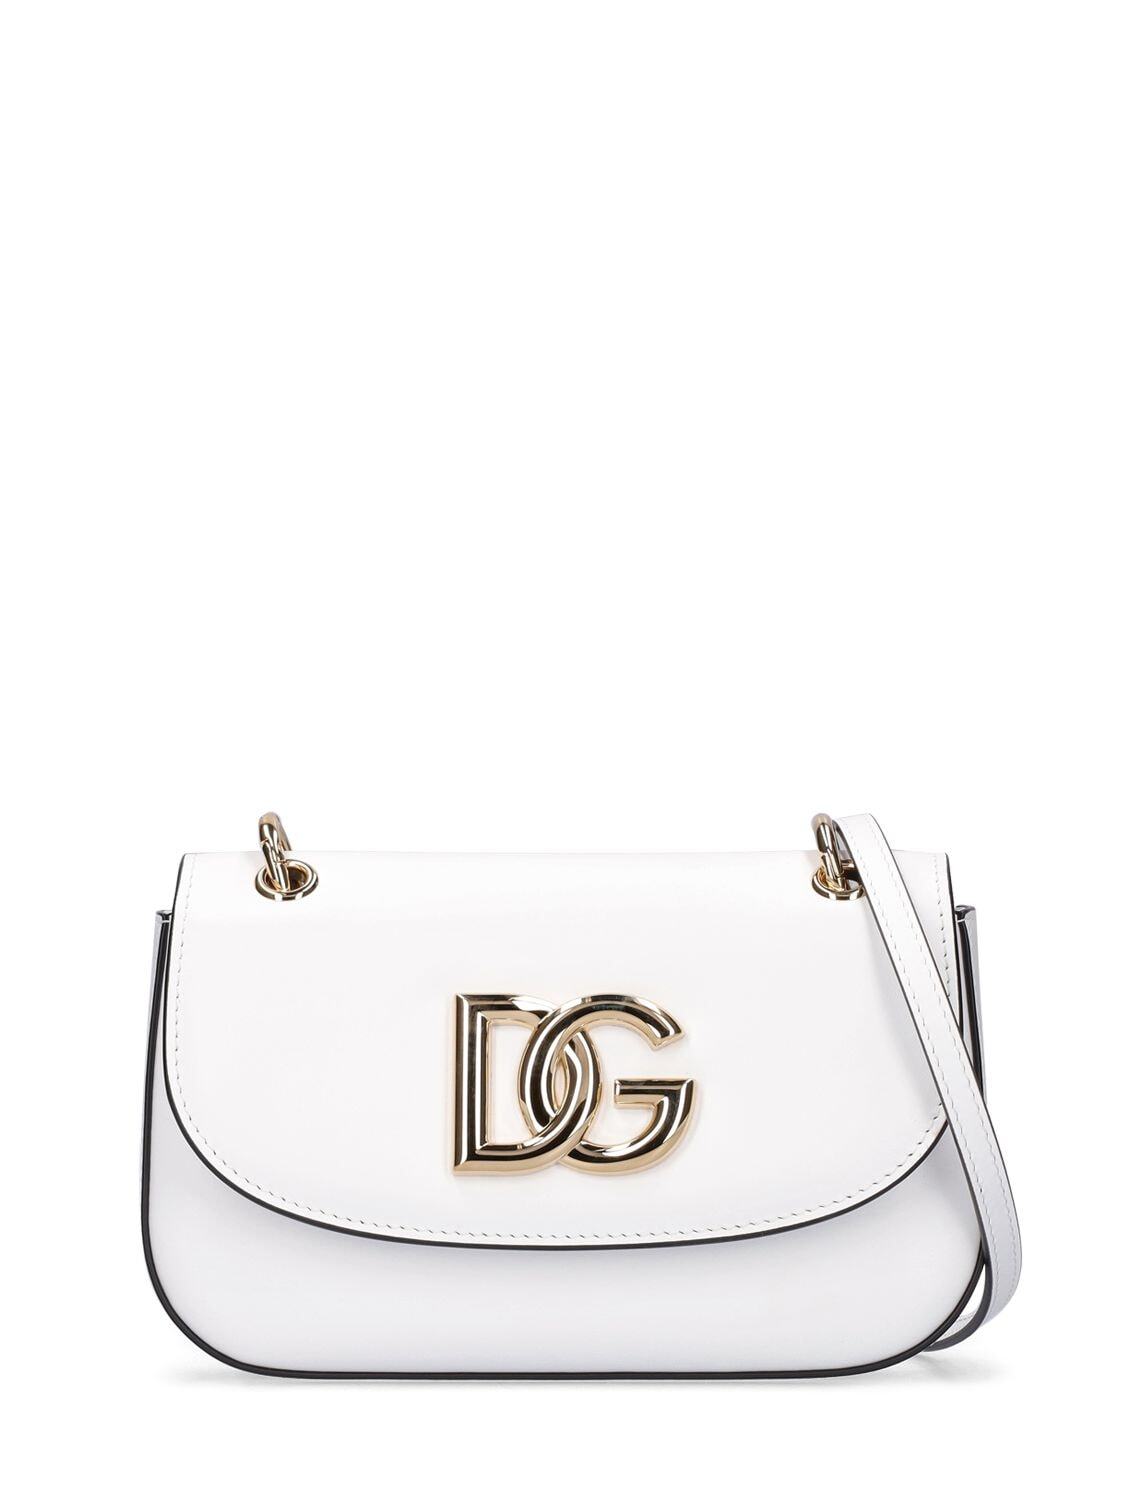 DOLCE & GABBANA 3.5 Smooth Leather Shoulder Bag in white